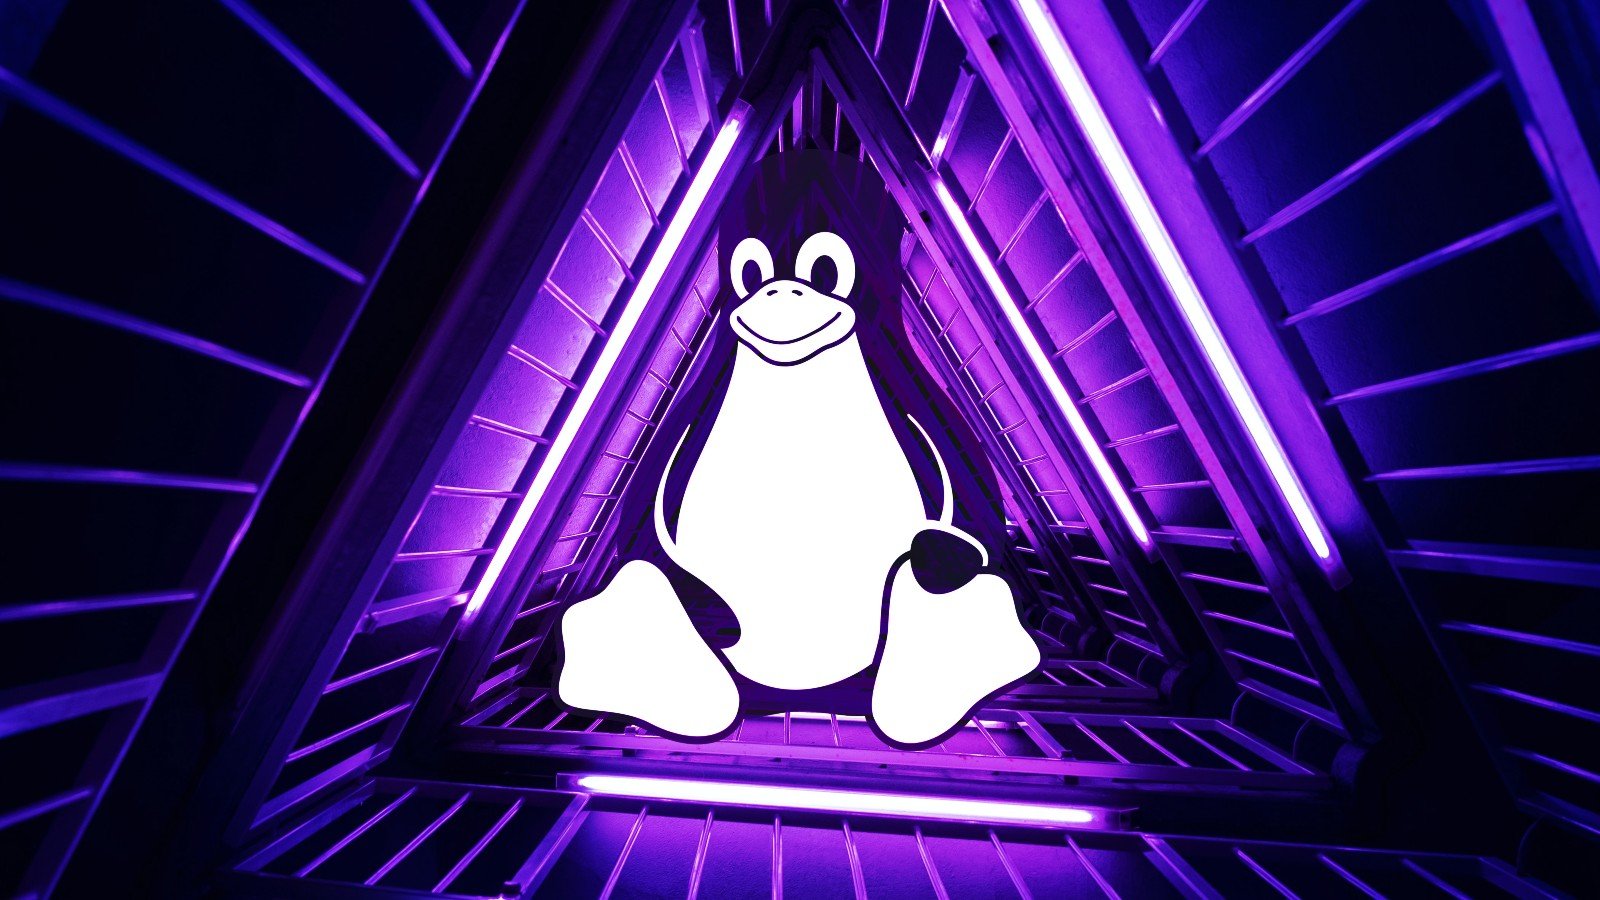 Linux's TUX in a cyber pipe